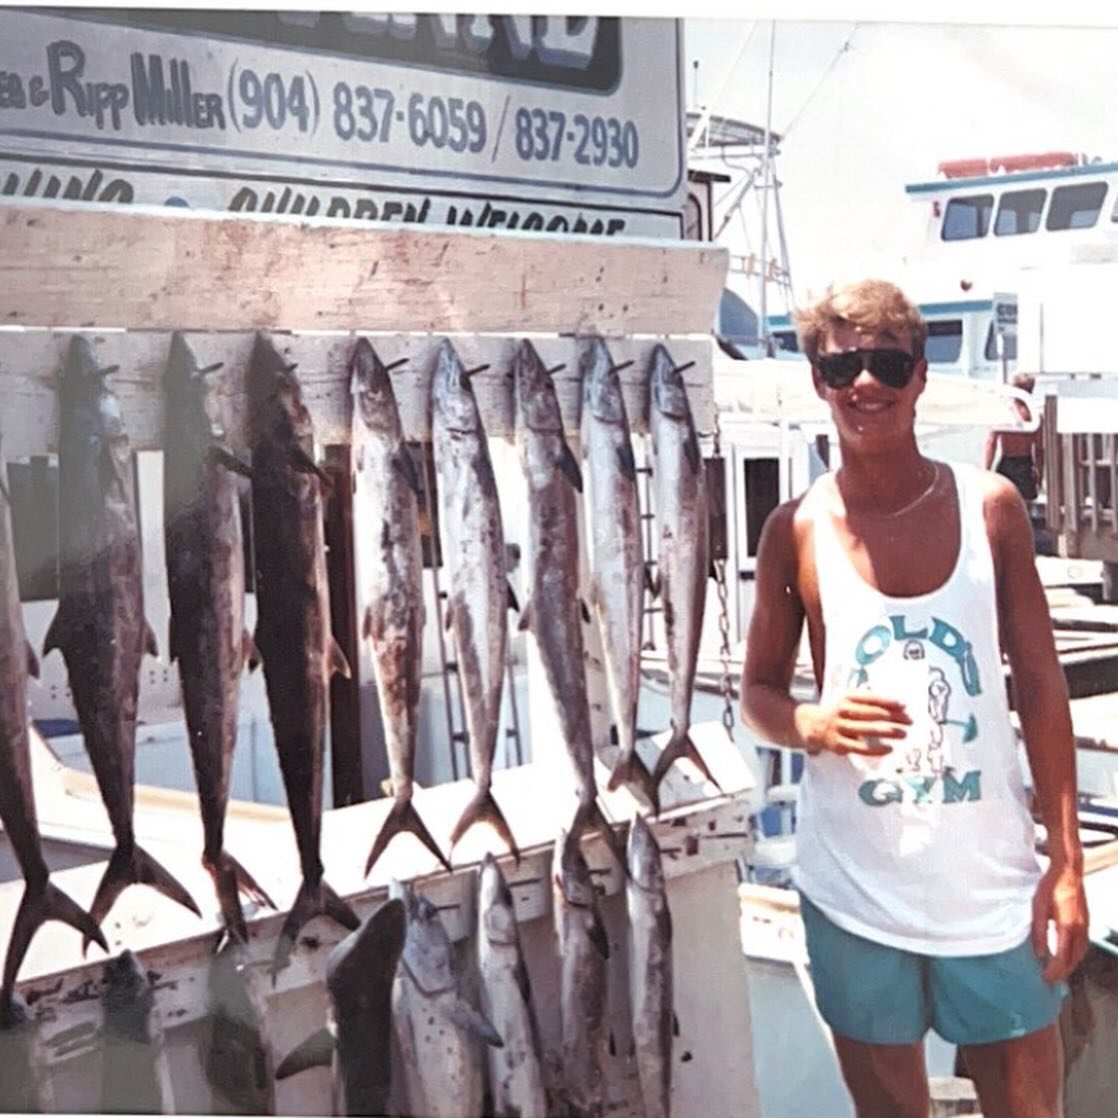 The throwback picture featured Ryan standing next to fish with a fresh tan and an oversized tank top